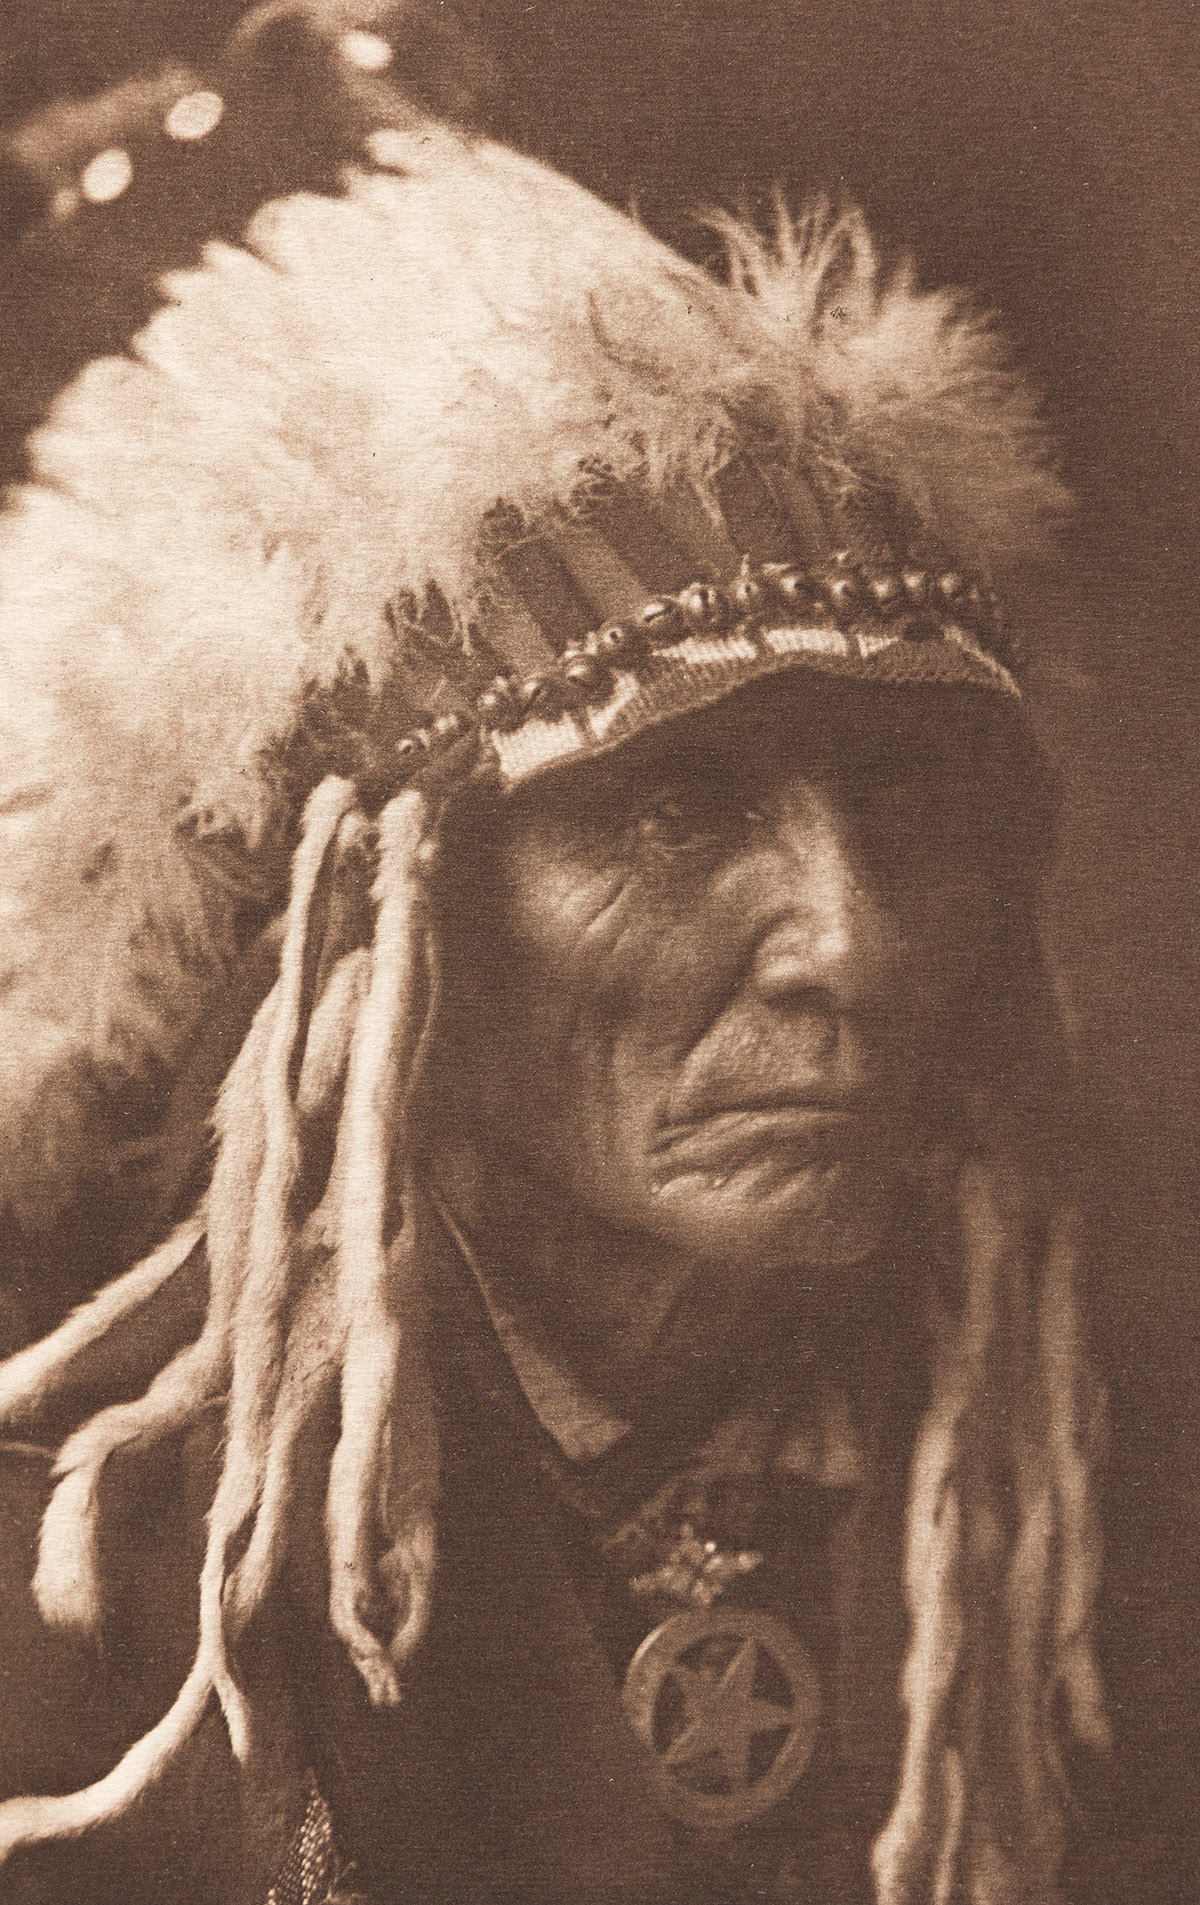 EDWARD S. CURTIS. The North American Indian. Volume III.